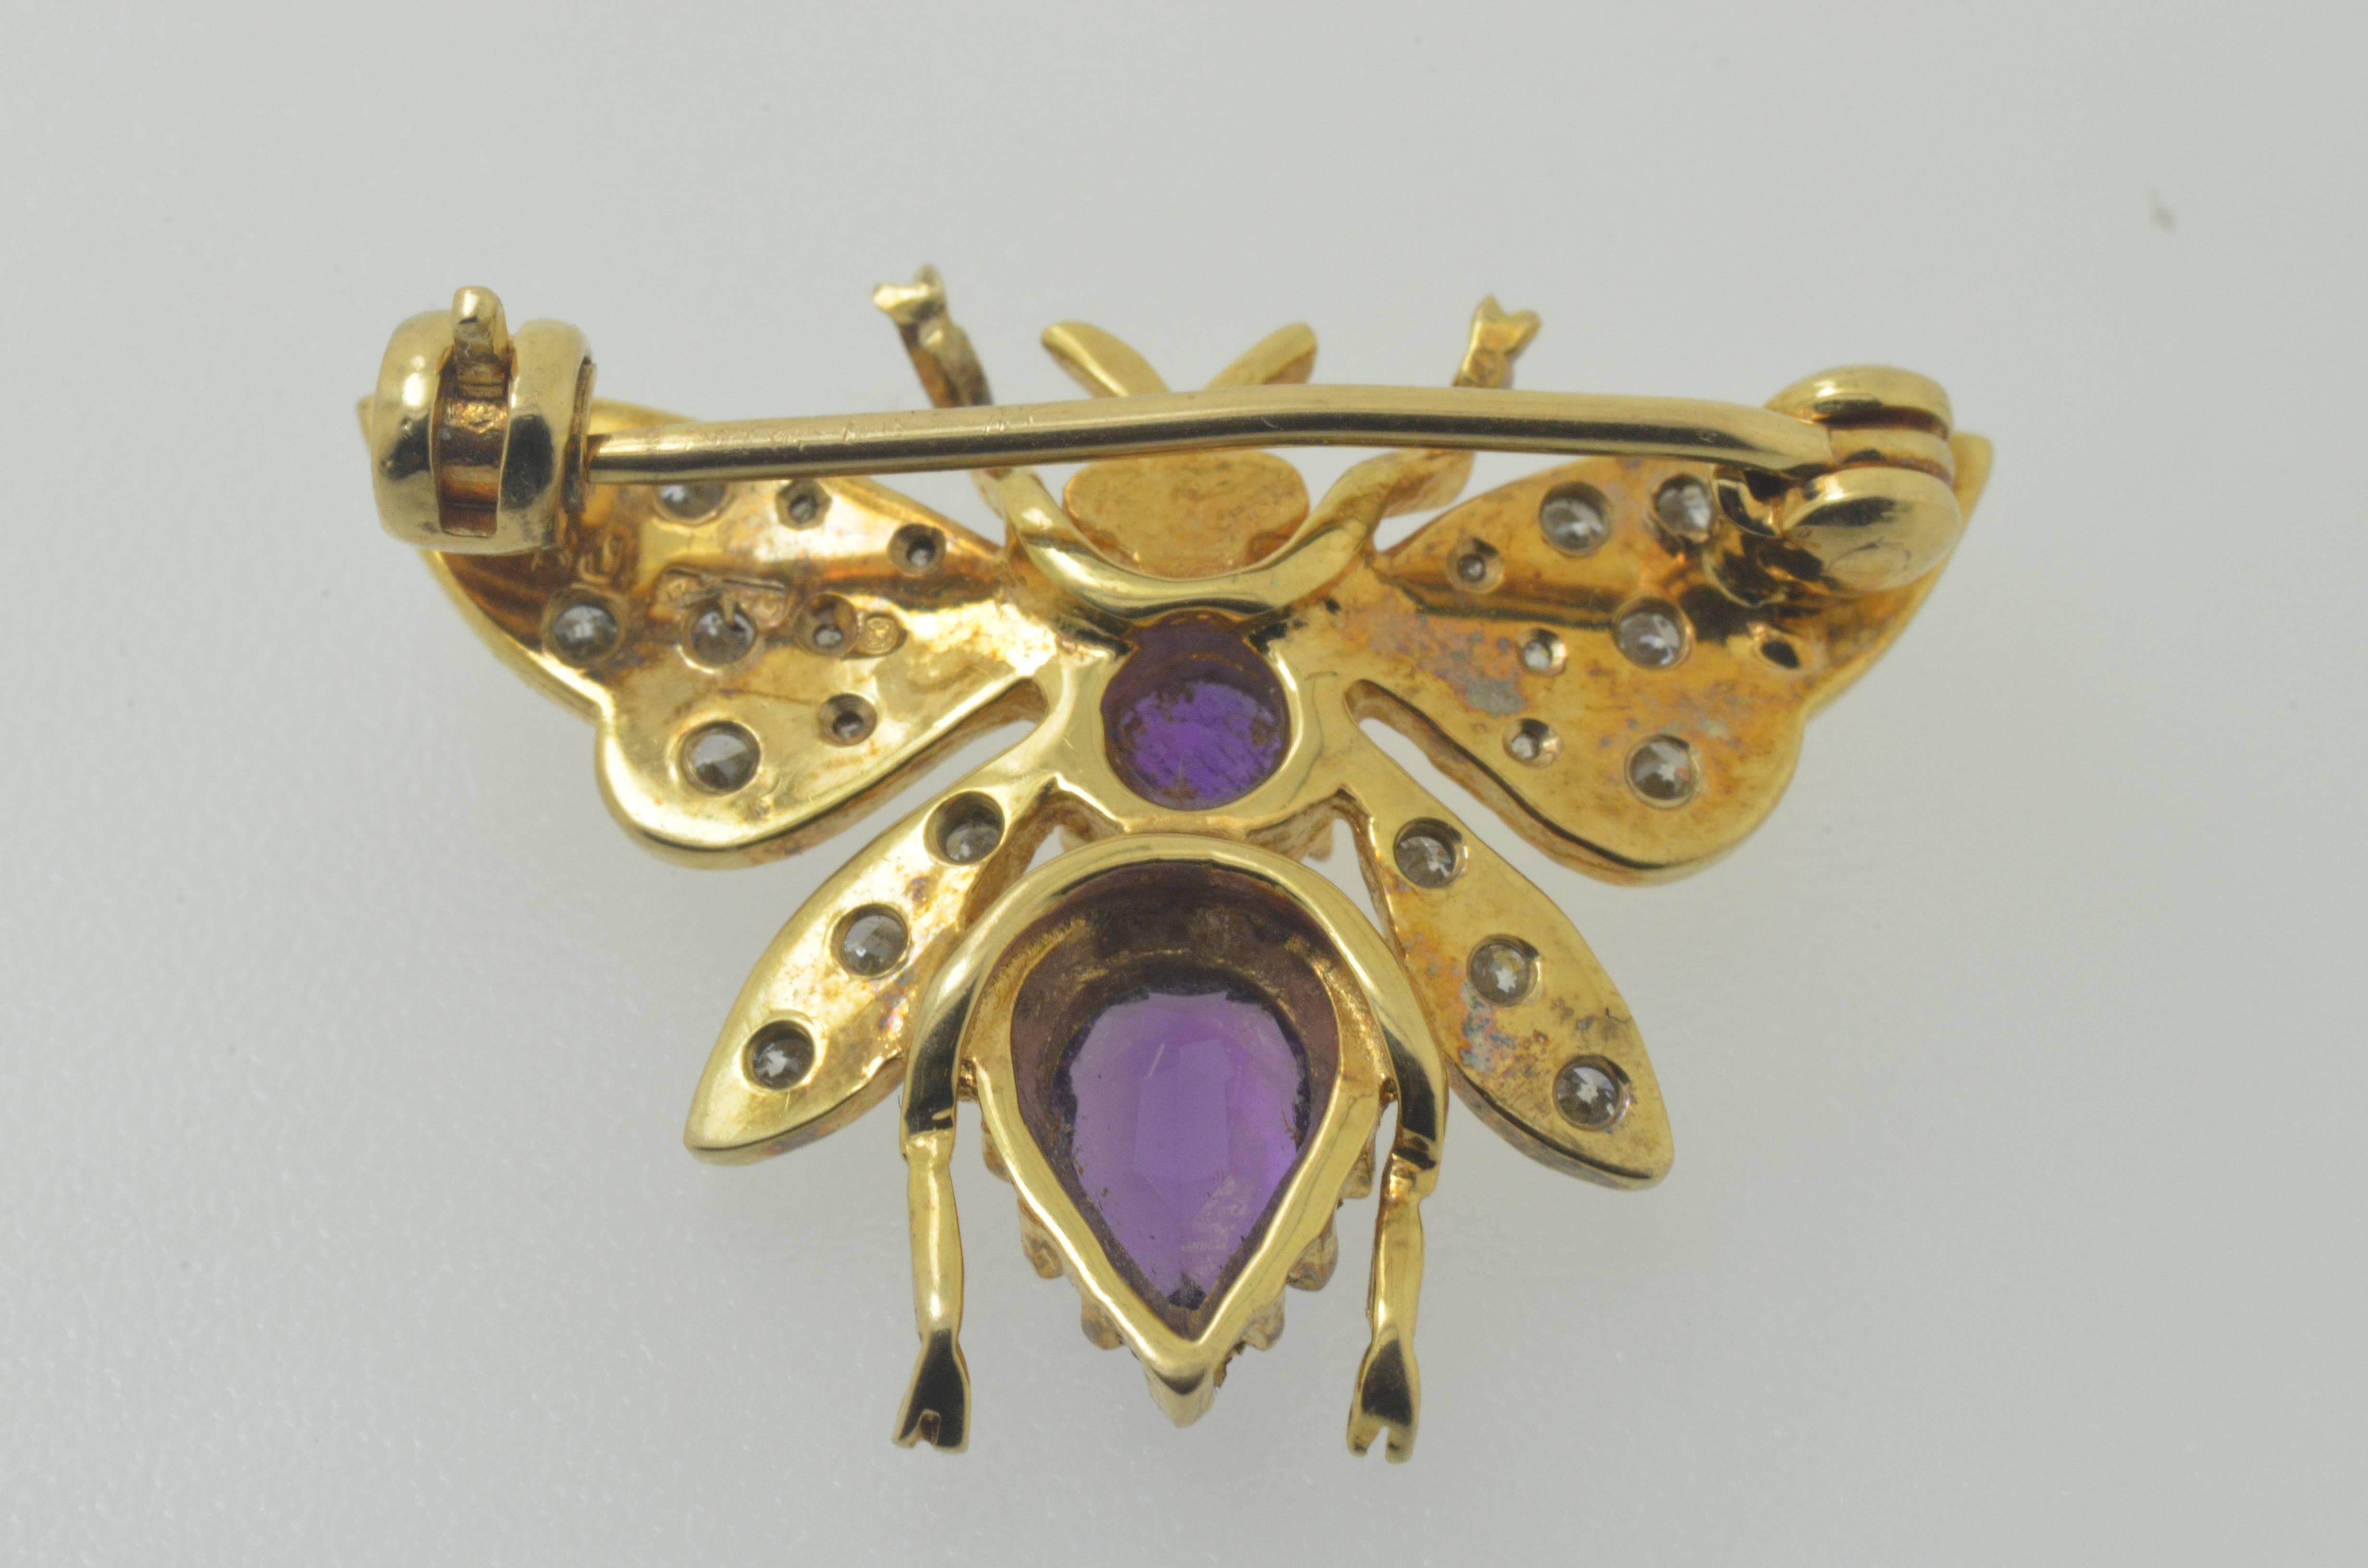 An 18 karat yellow gold brooch set with 24 clean white brilliant cut diamonds, ruby eyes and amethyst body. 